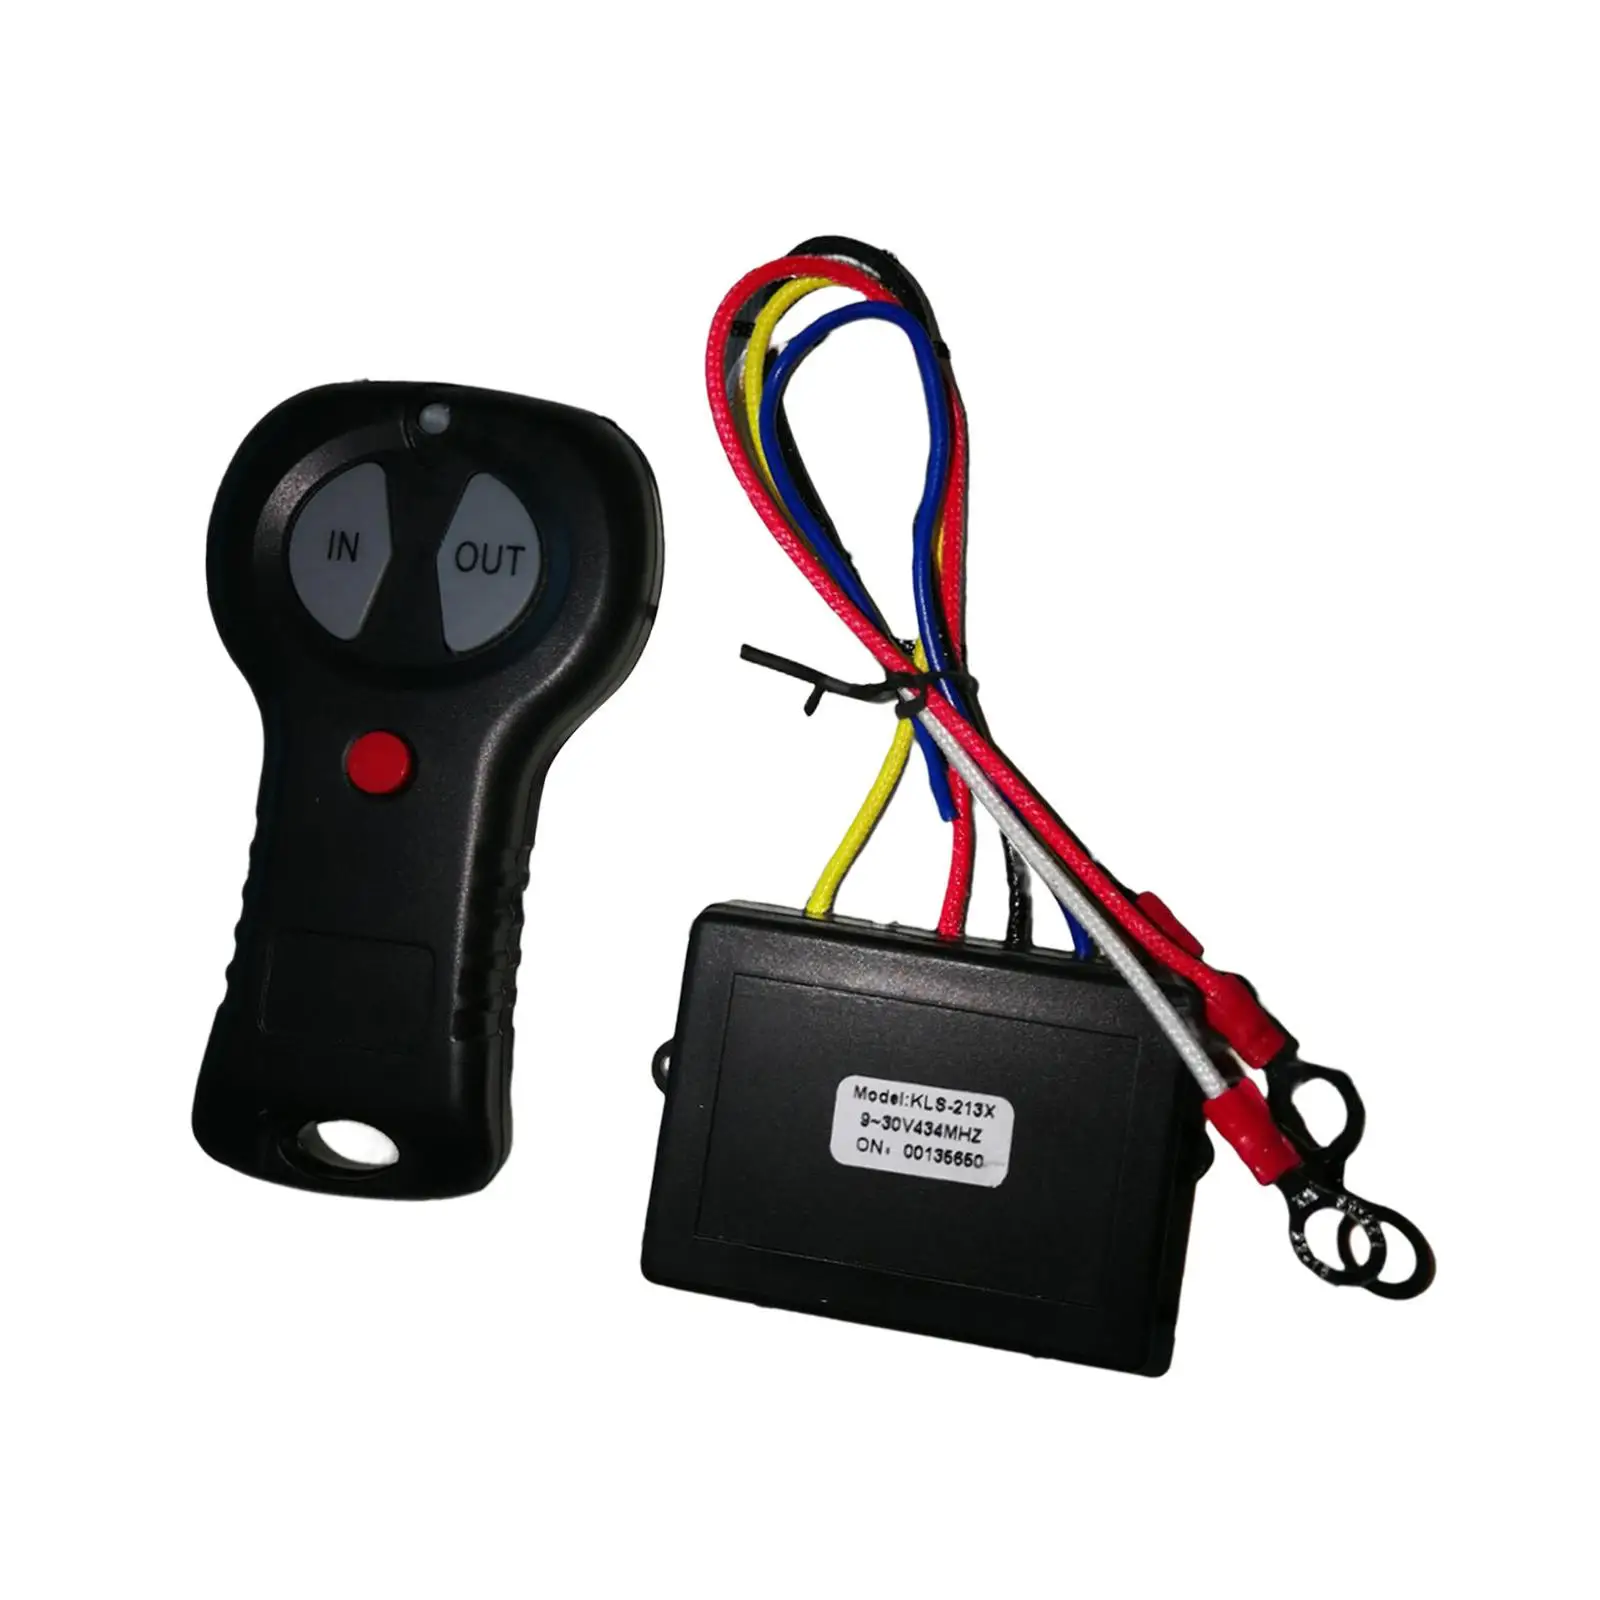 Winch Remote Control Handset Switch with Indicator Light 12V Accessory Car Truck Winch Control for Trucks Car ATV Auto SUV